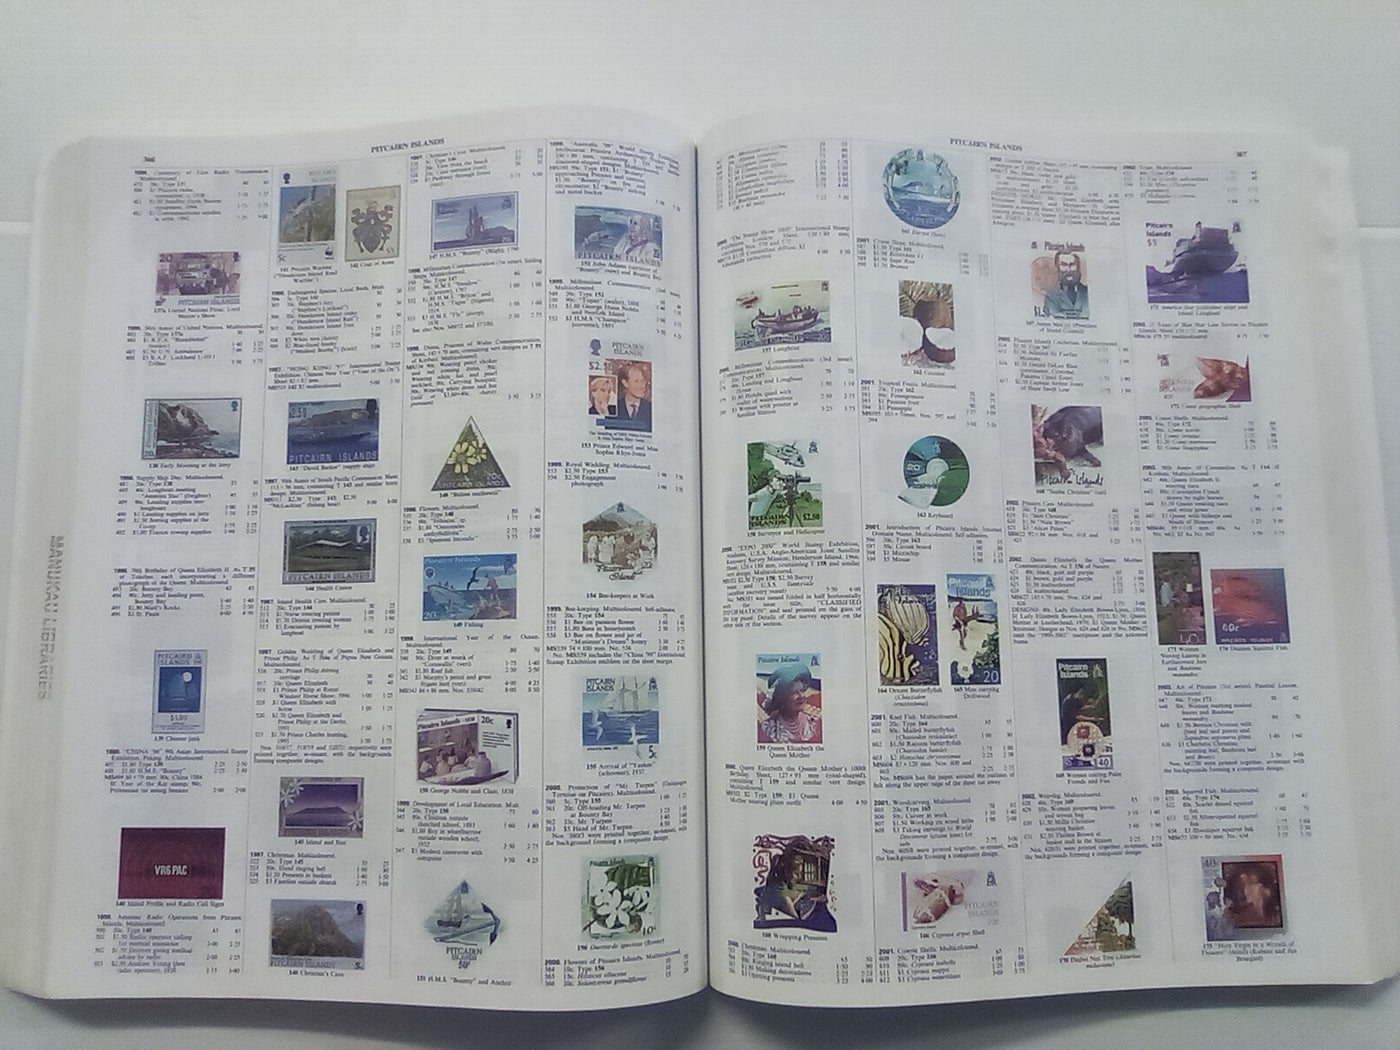 Stanley Gibbons - Stamps of the World Catalogue 2006 Vol.4 Countries N to R